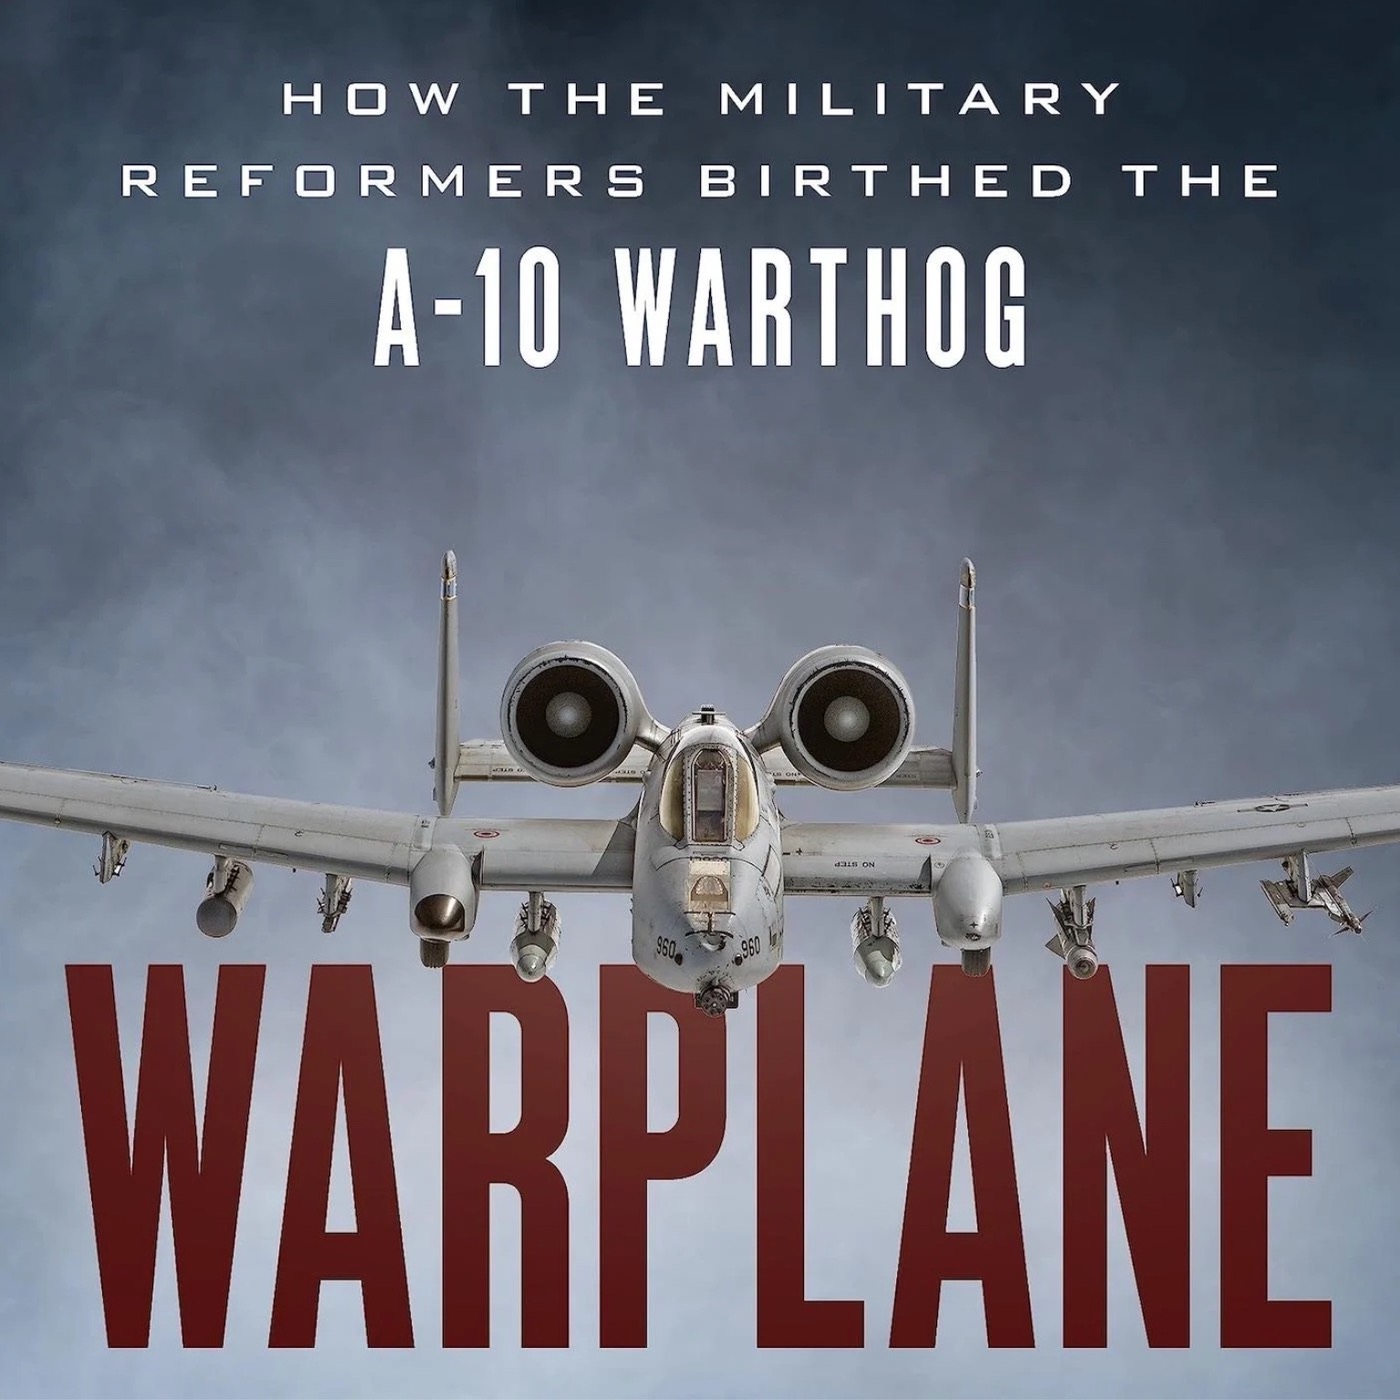 Book: Warplane - How the Military Reformers Birthed the A-10 Warthog